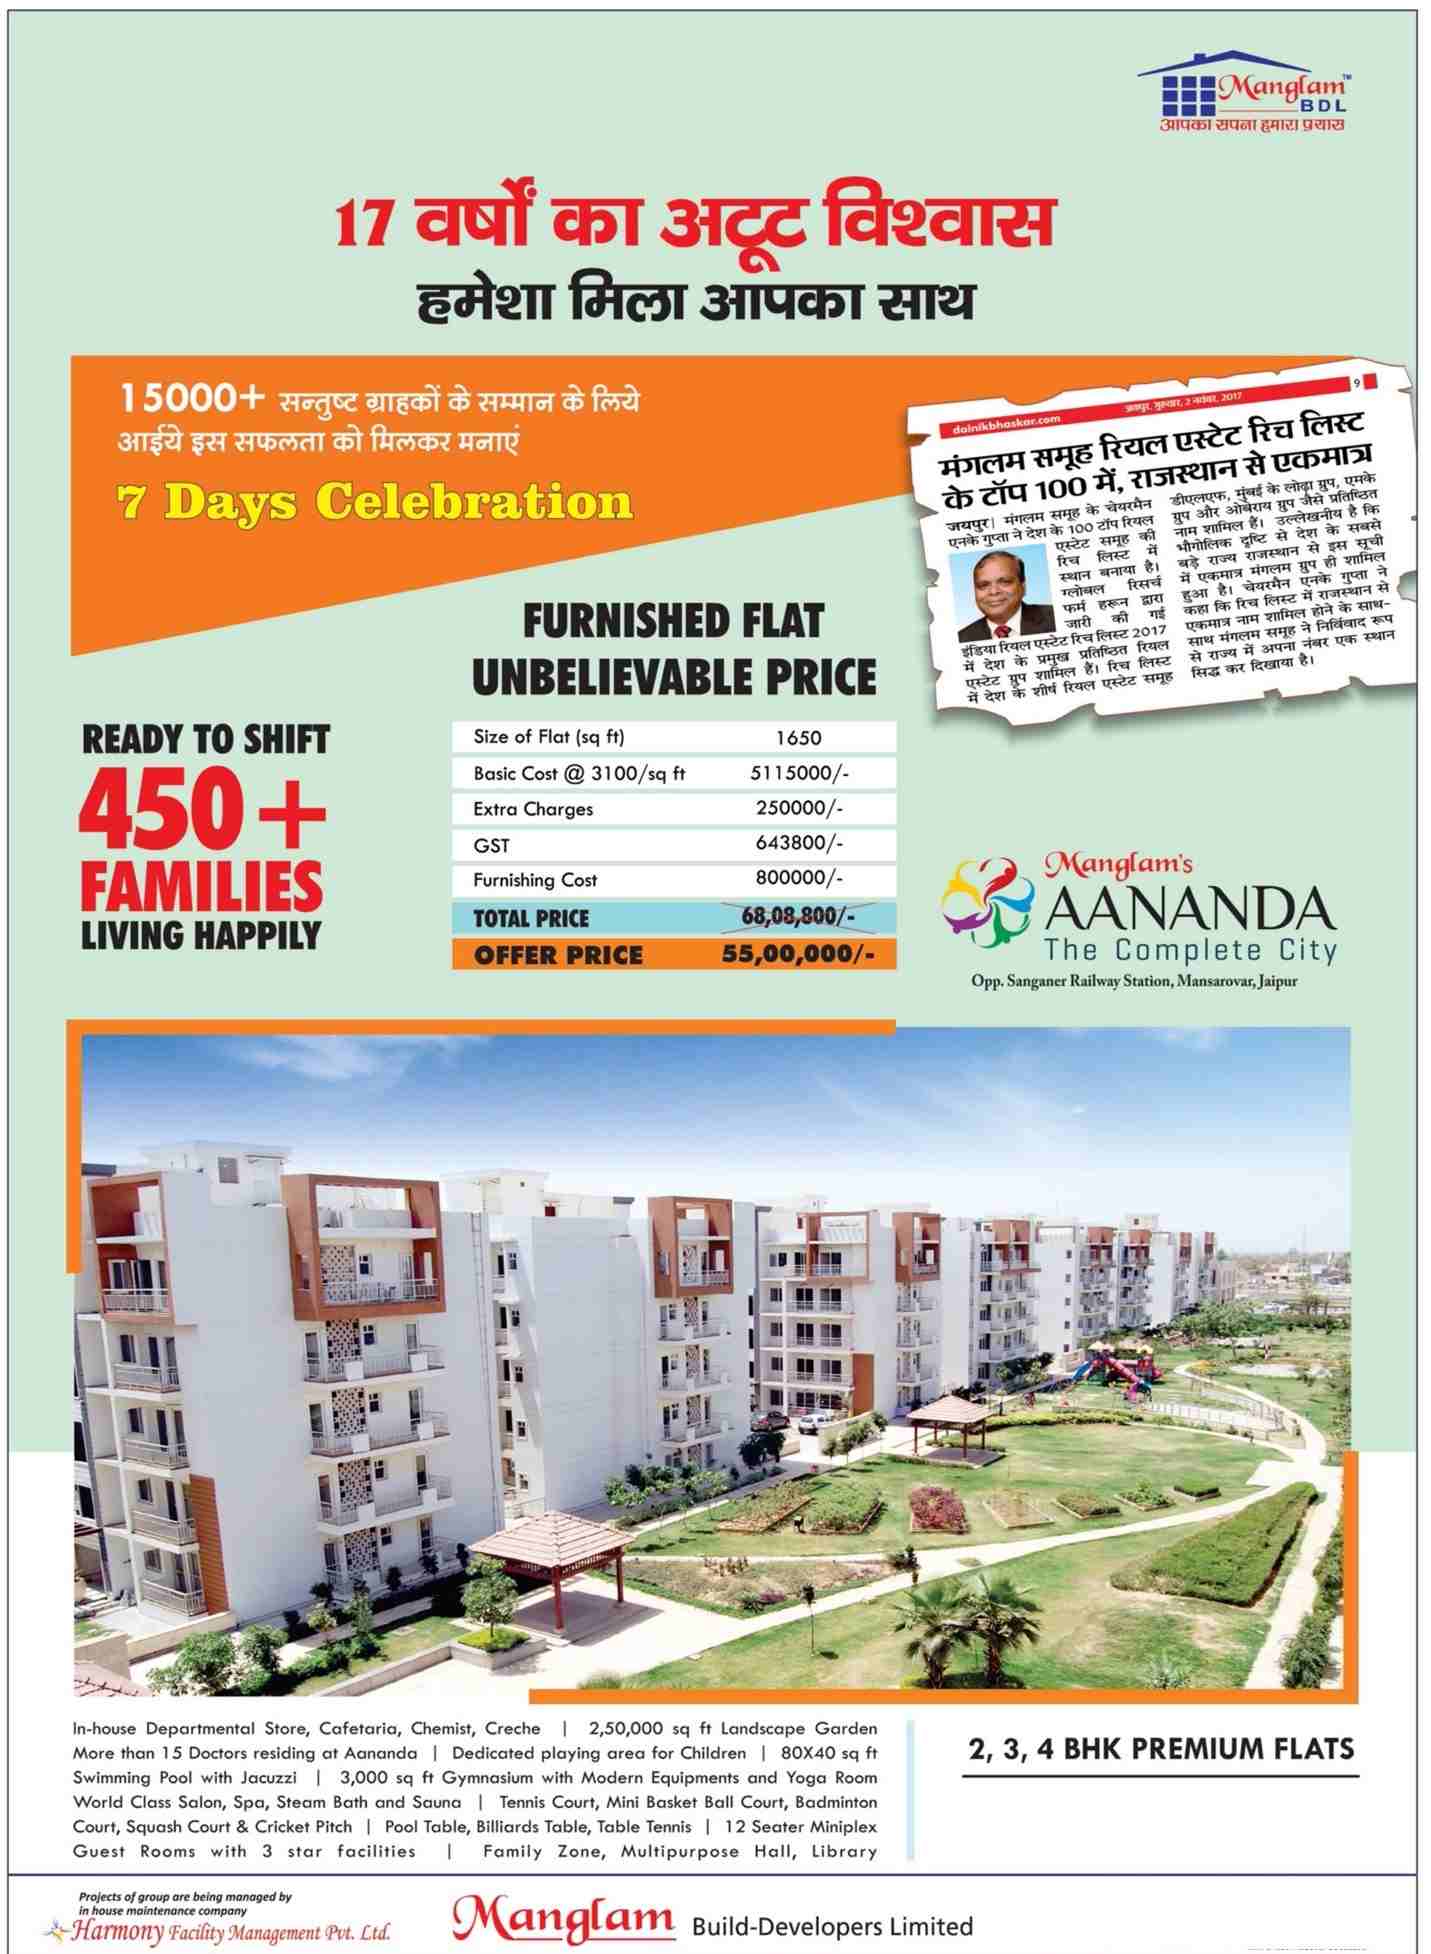 Manglam Aananda is now ready to move in Jaipur